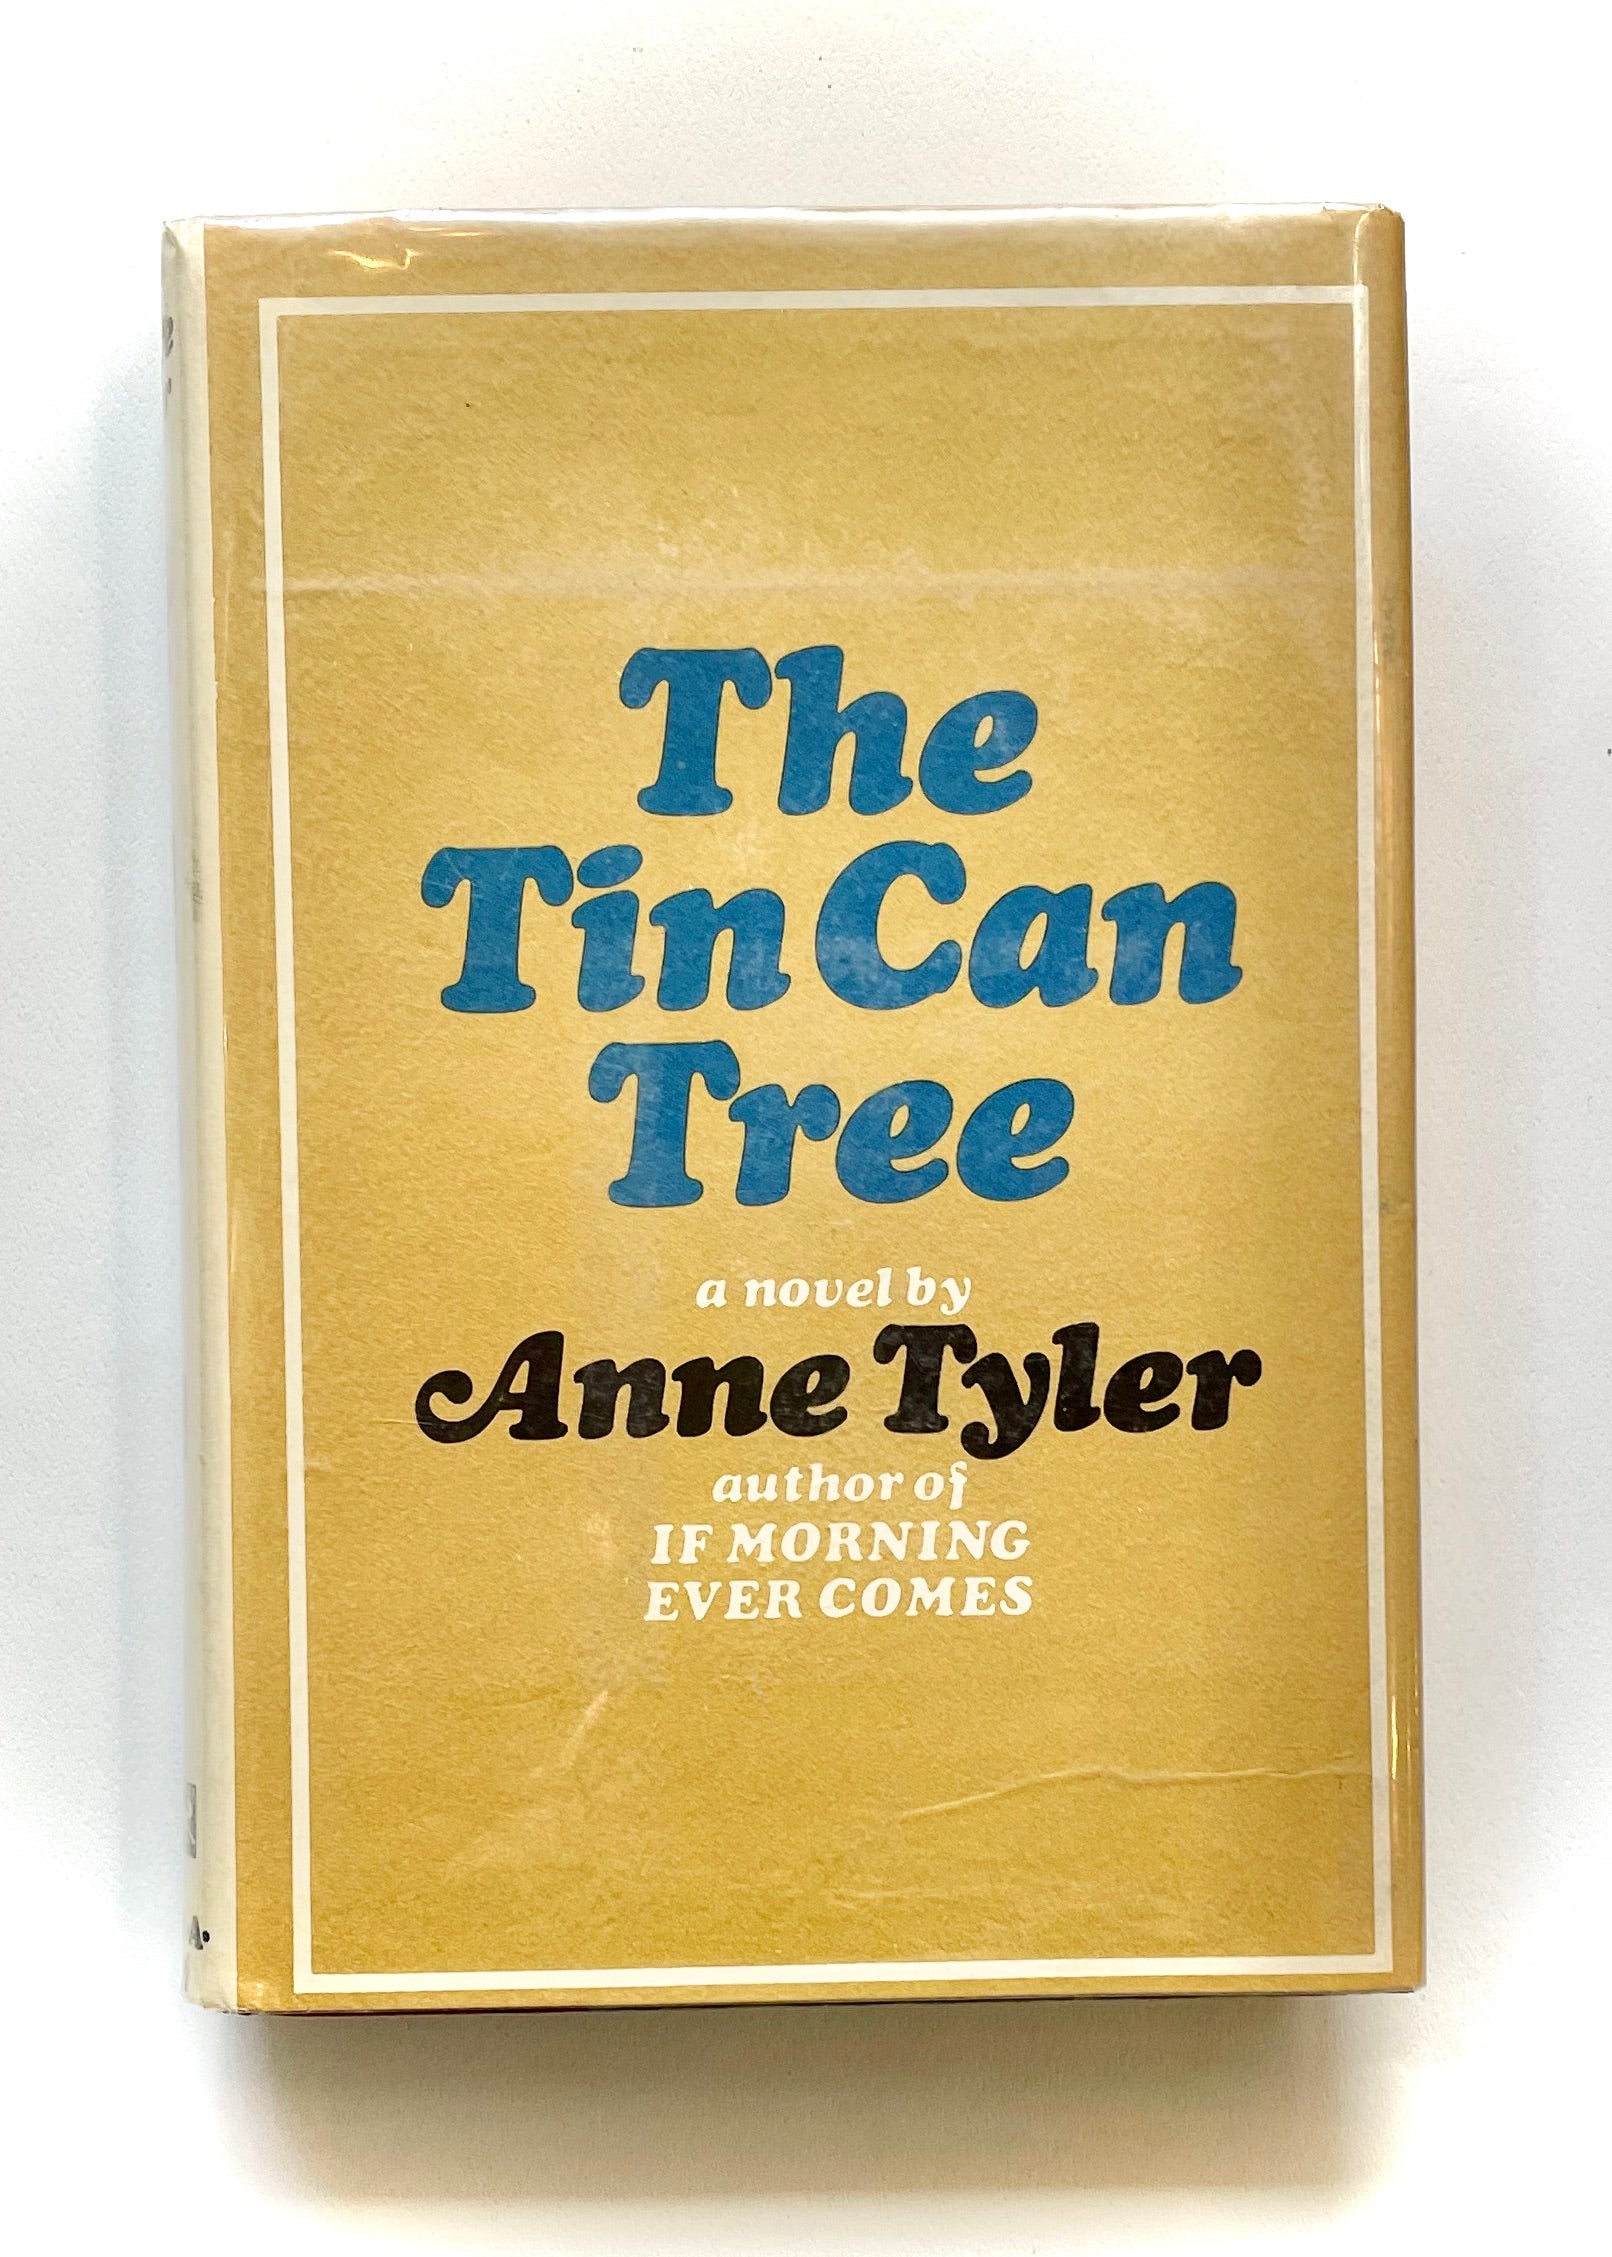 1965 "The Tin Can Tree" by Anne Tyler